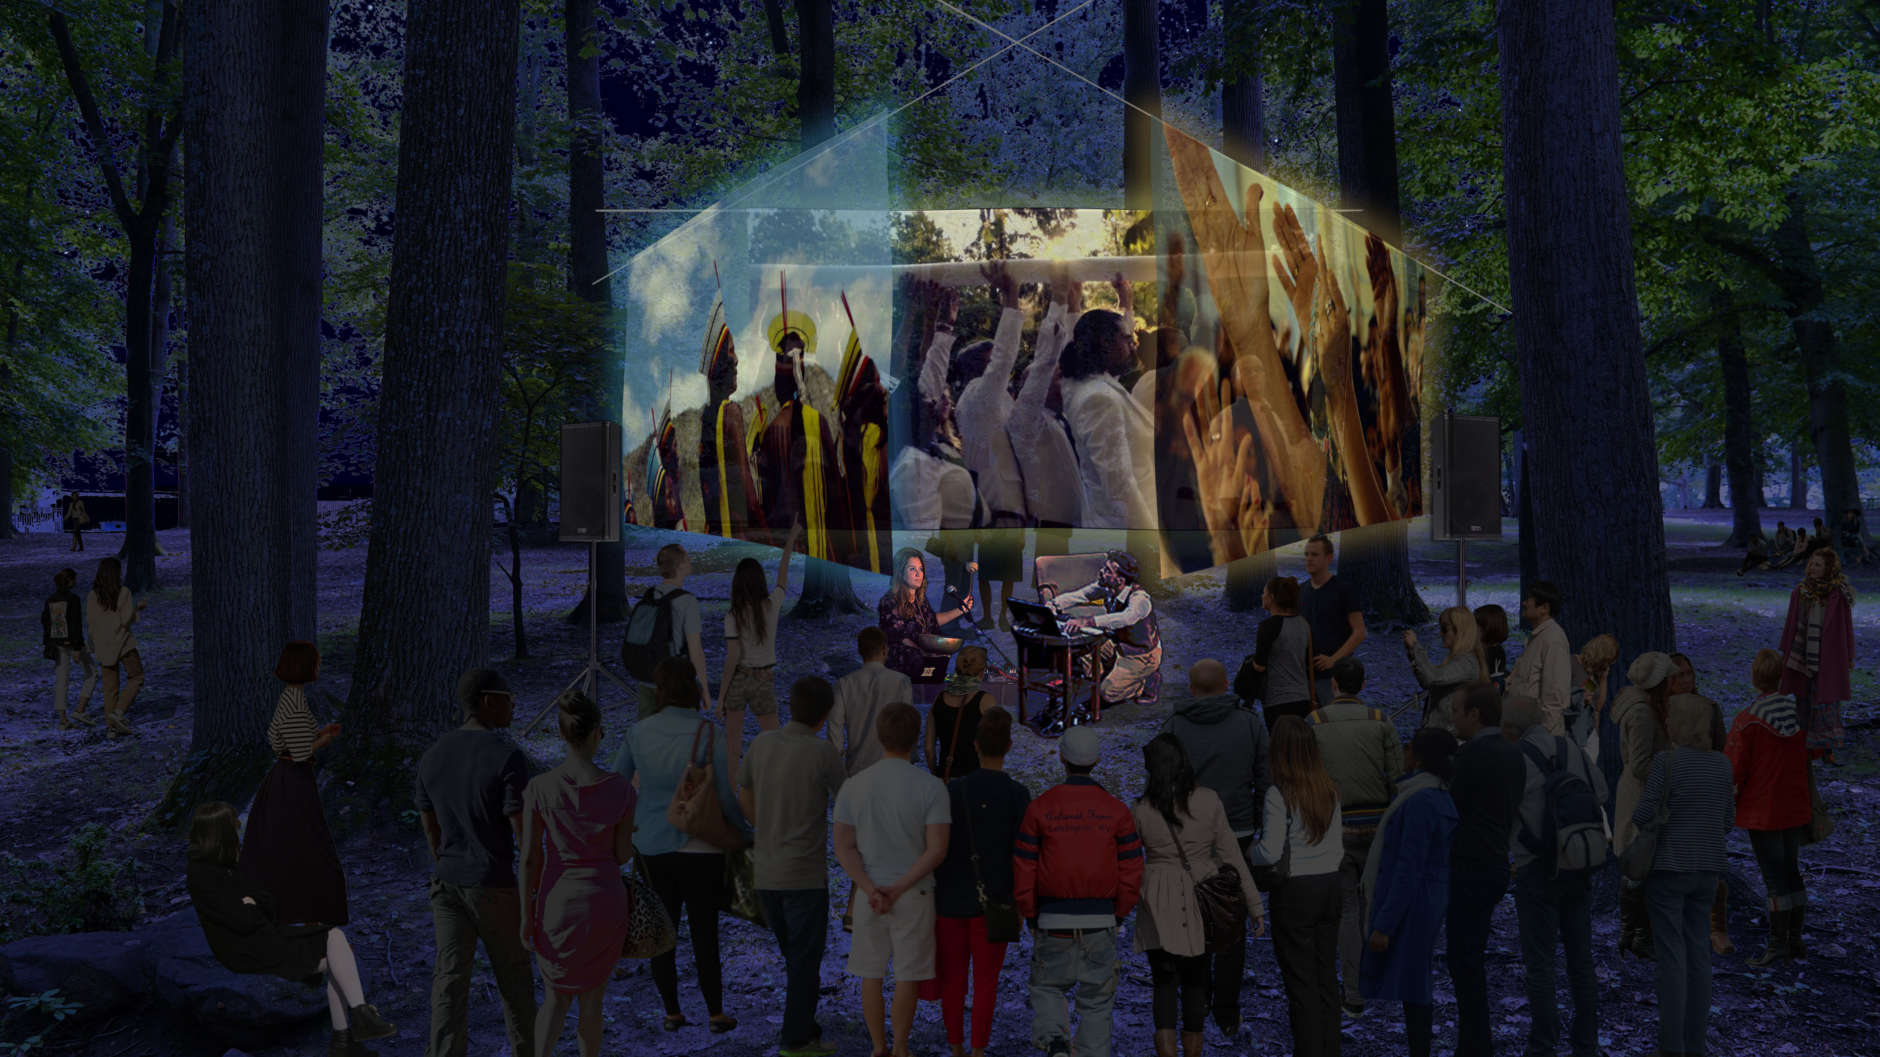 Merriweather Park at Symphony Woods will host the inaugural OPUS 1 festival, which comprises 11 large installations for all ages. (Rendering courtesy Wild Dogs International)